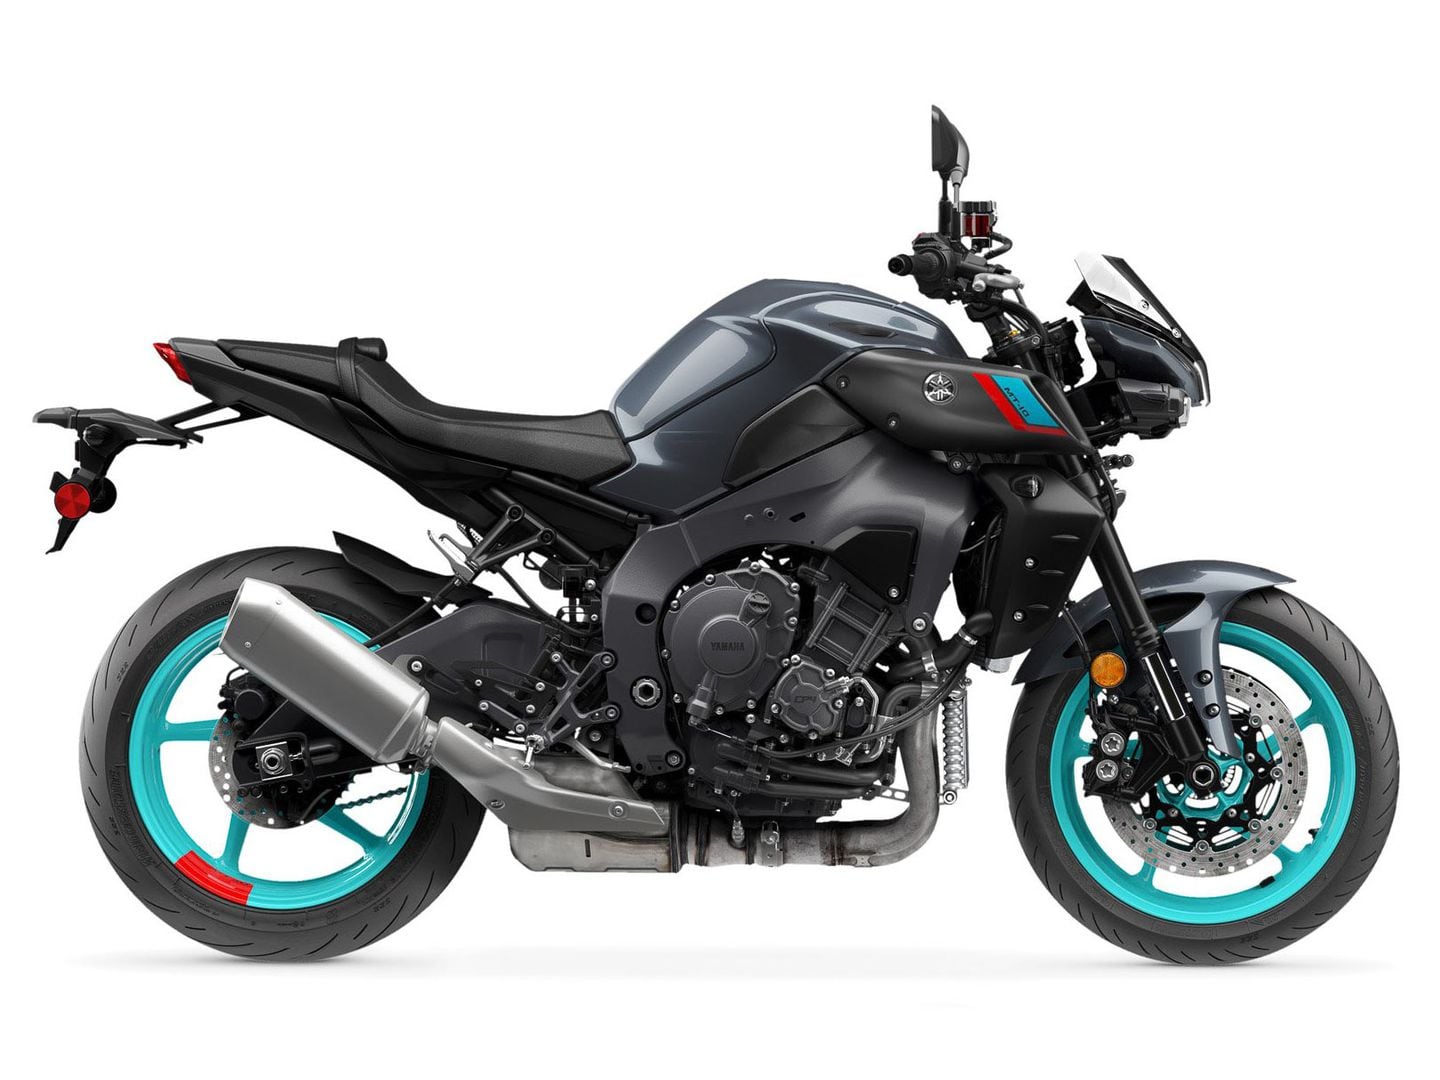 2022 Yamaha MT10 Buyer's Guide Specs, Photos, Price Cycle World